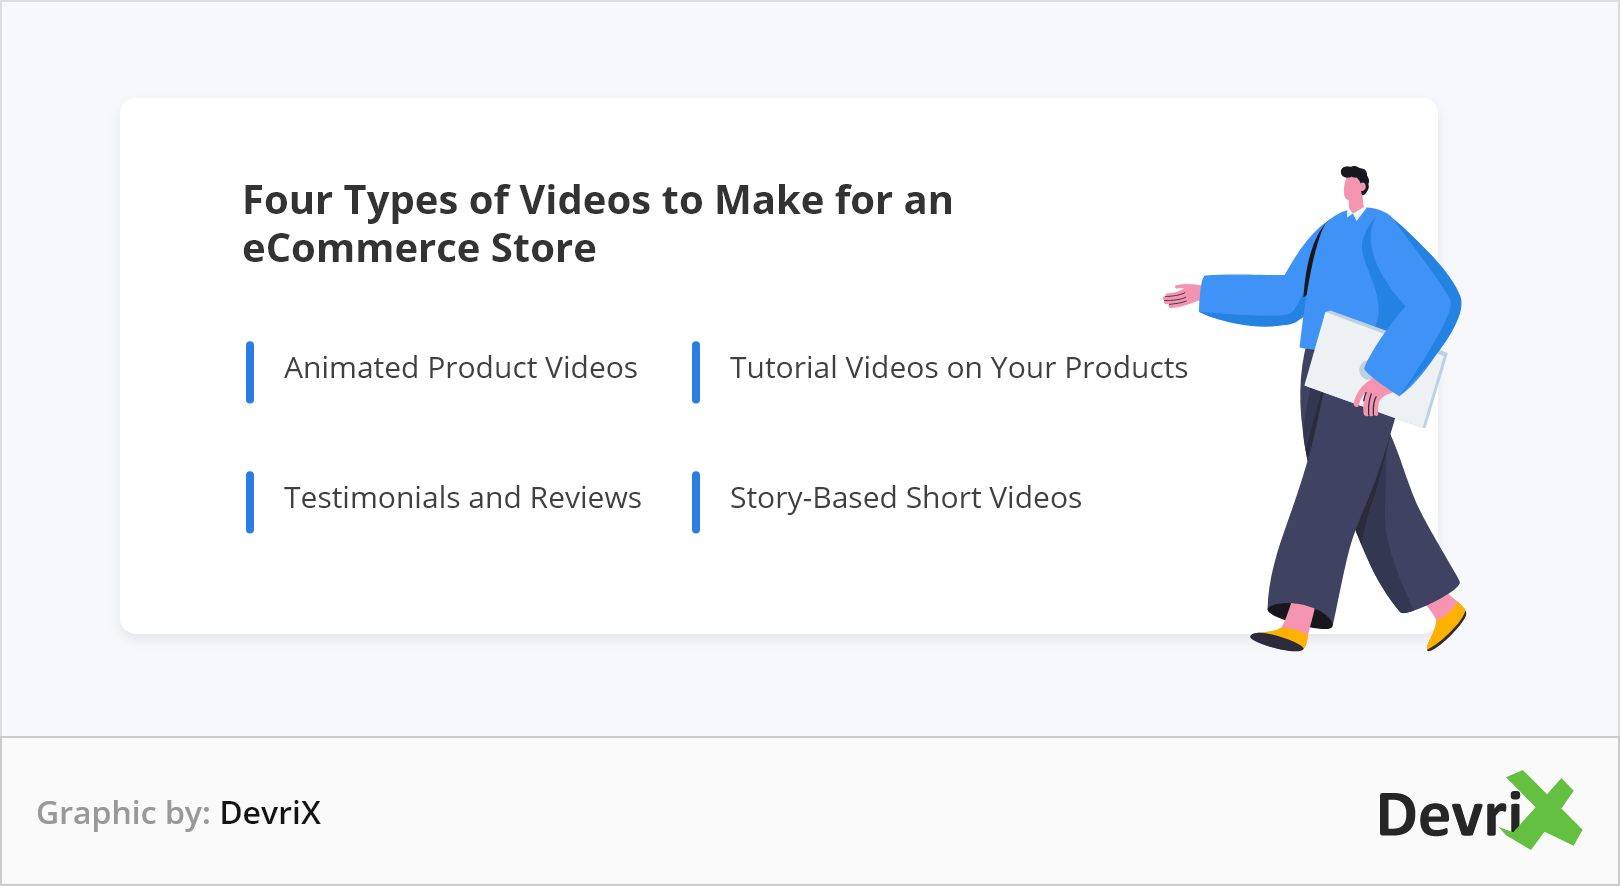 Four Types of Videos to Make for an eCommerce Store